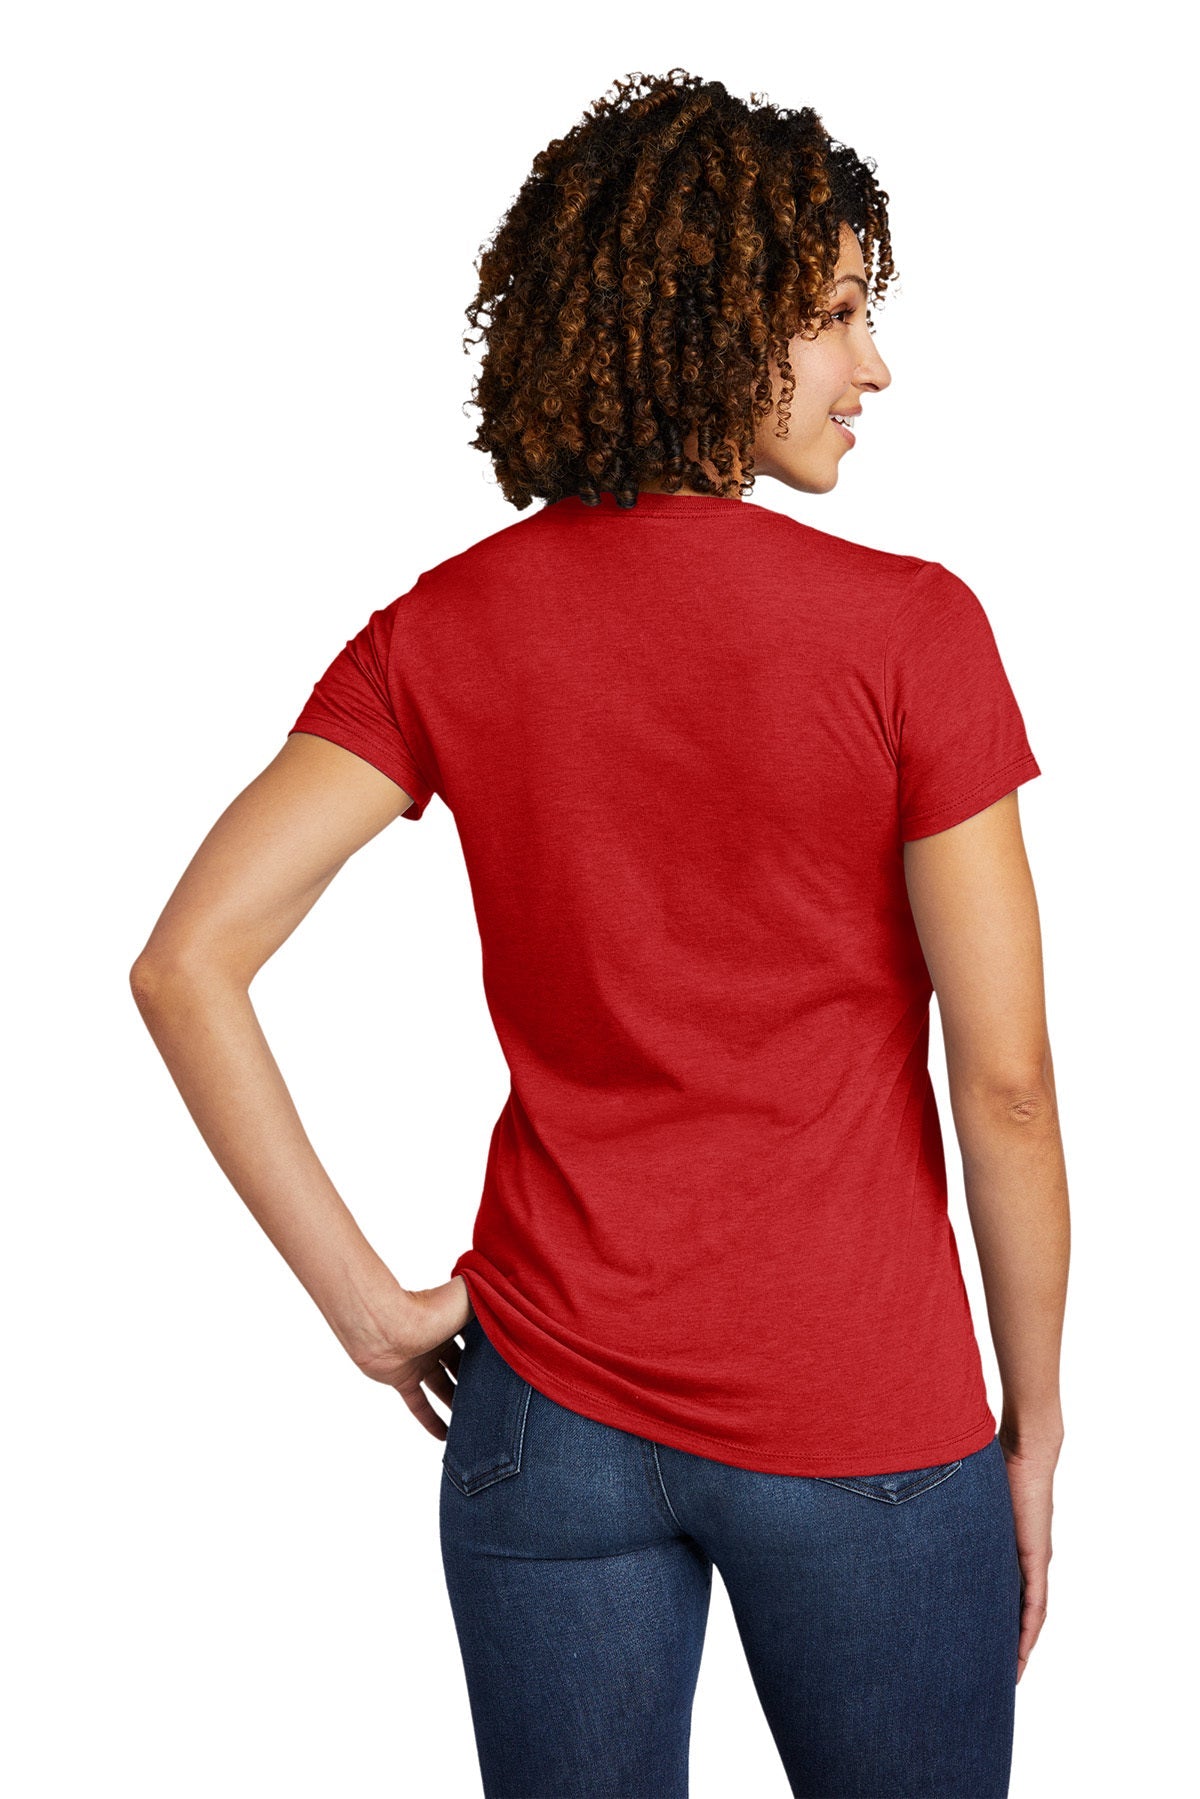 Allmade Women's Tri-Blend Customized V-Neck Tee, Rise Up Red